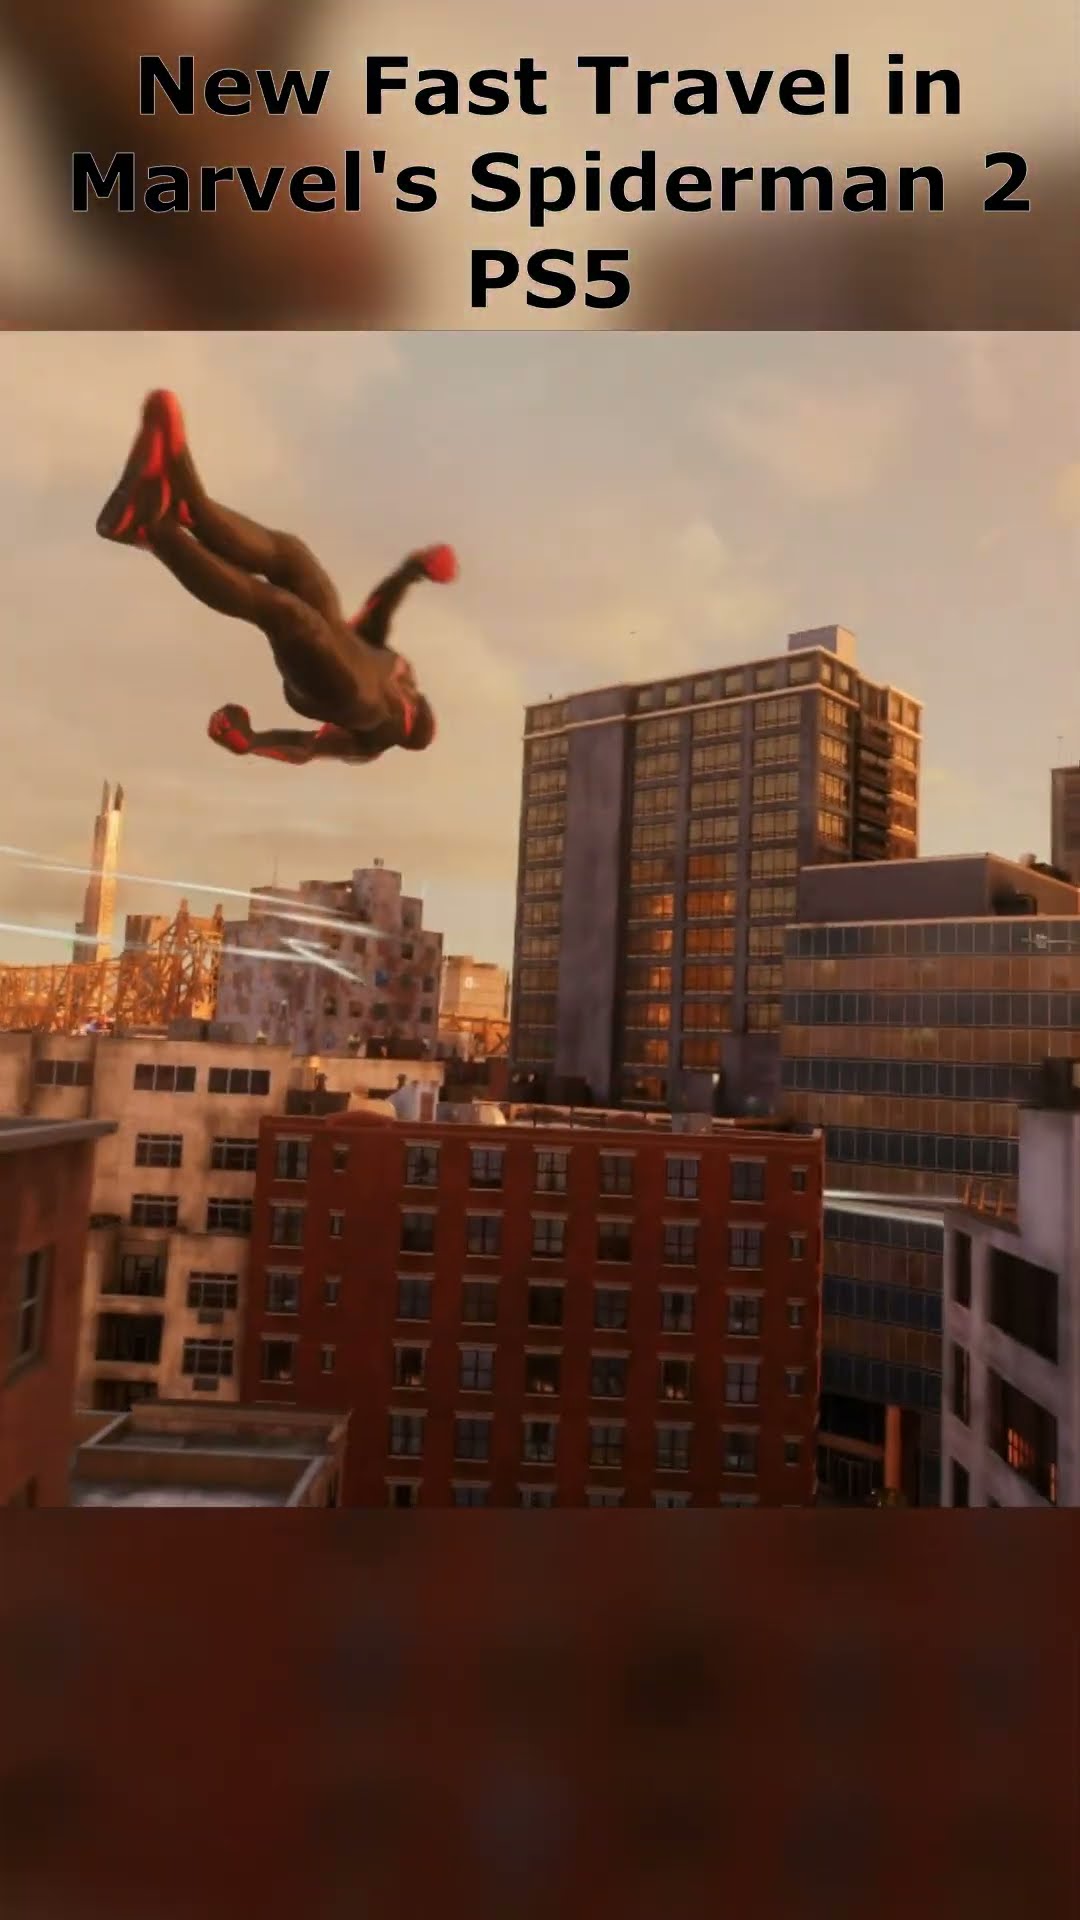 New Fast Travel Feature in Marvel Spiderman 2 PS5 Subscribe to our channel for more updates